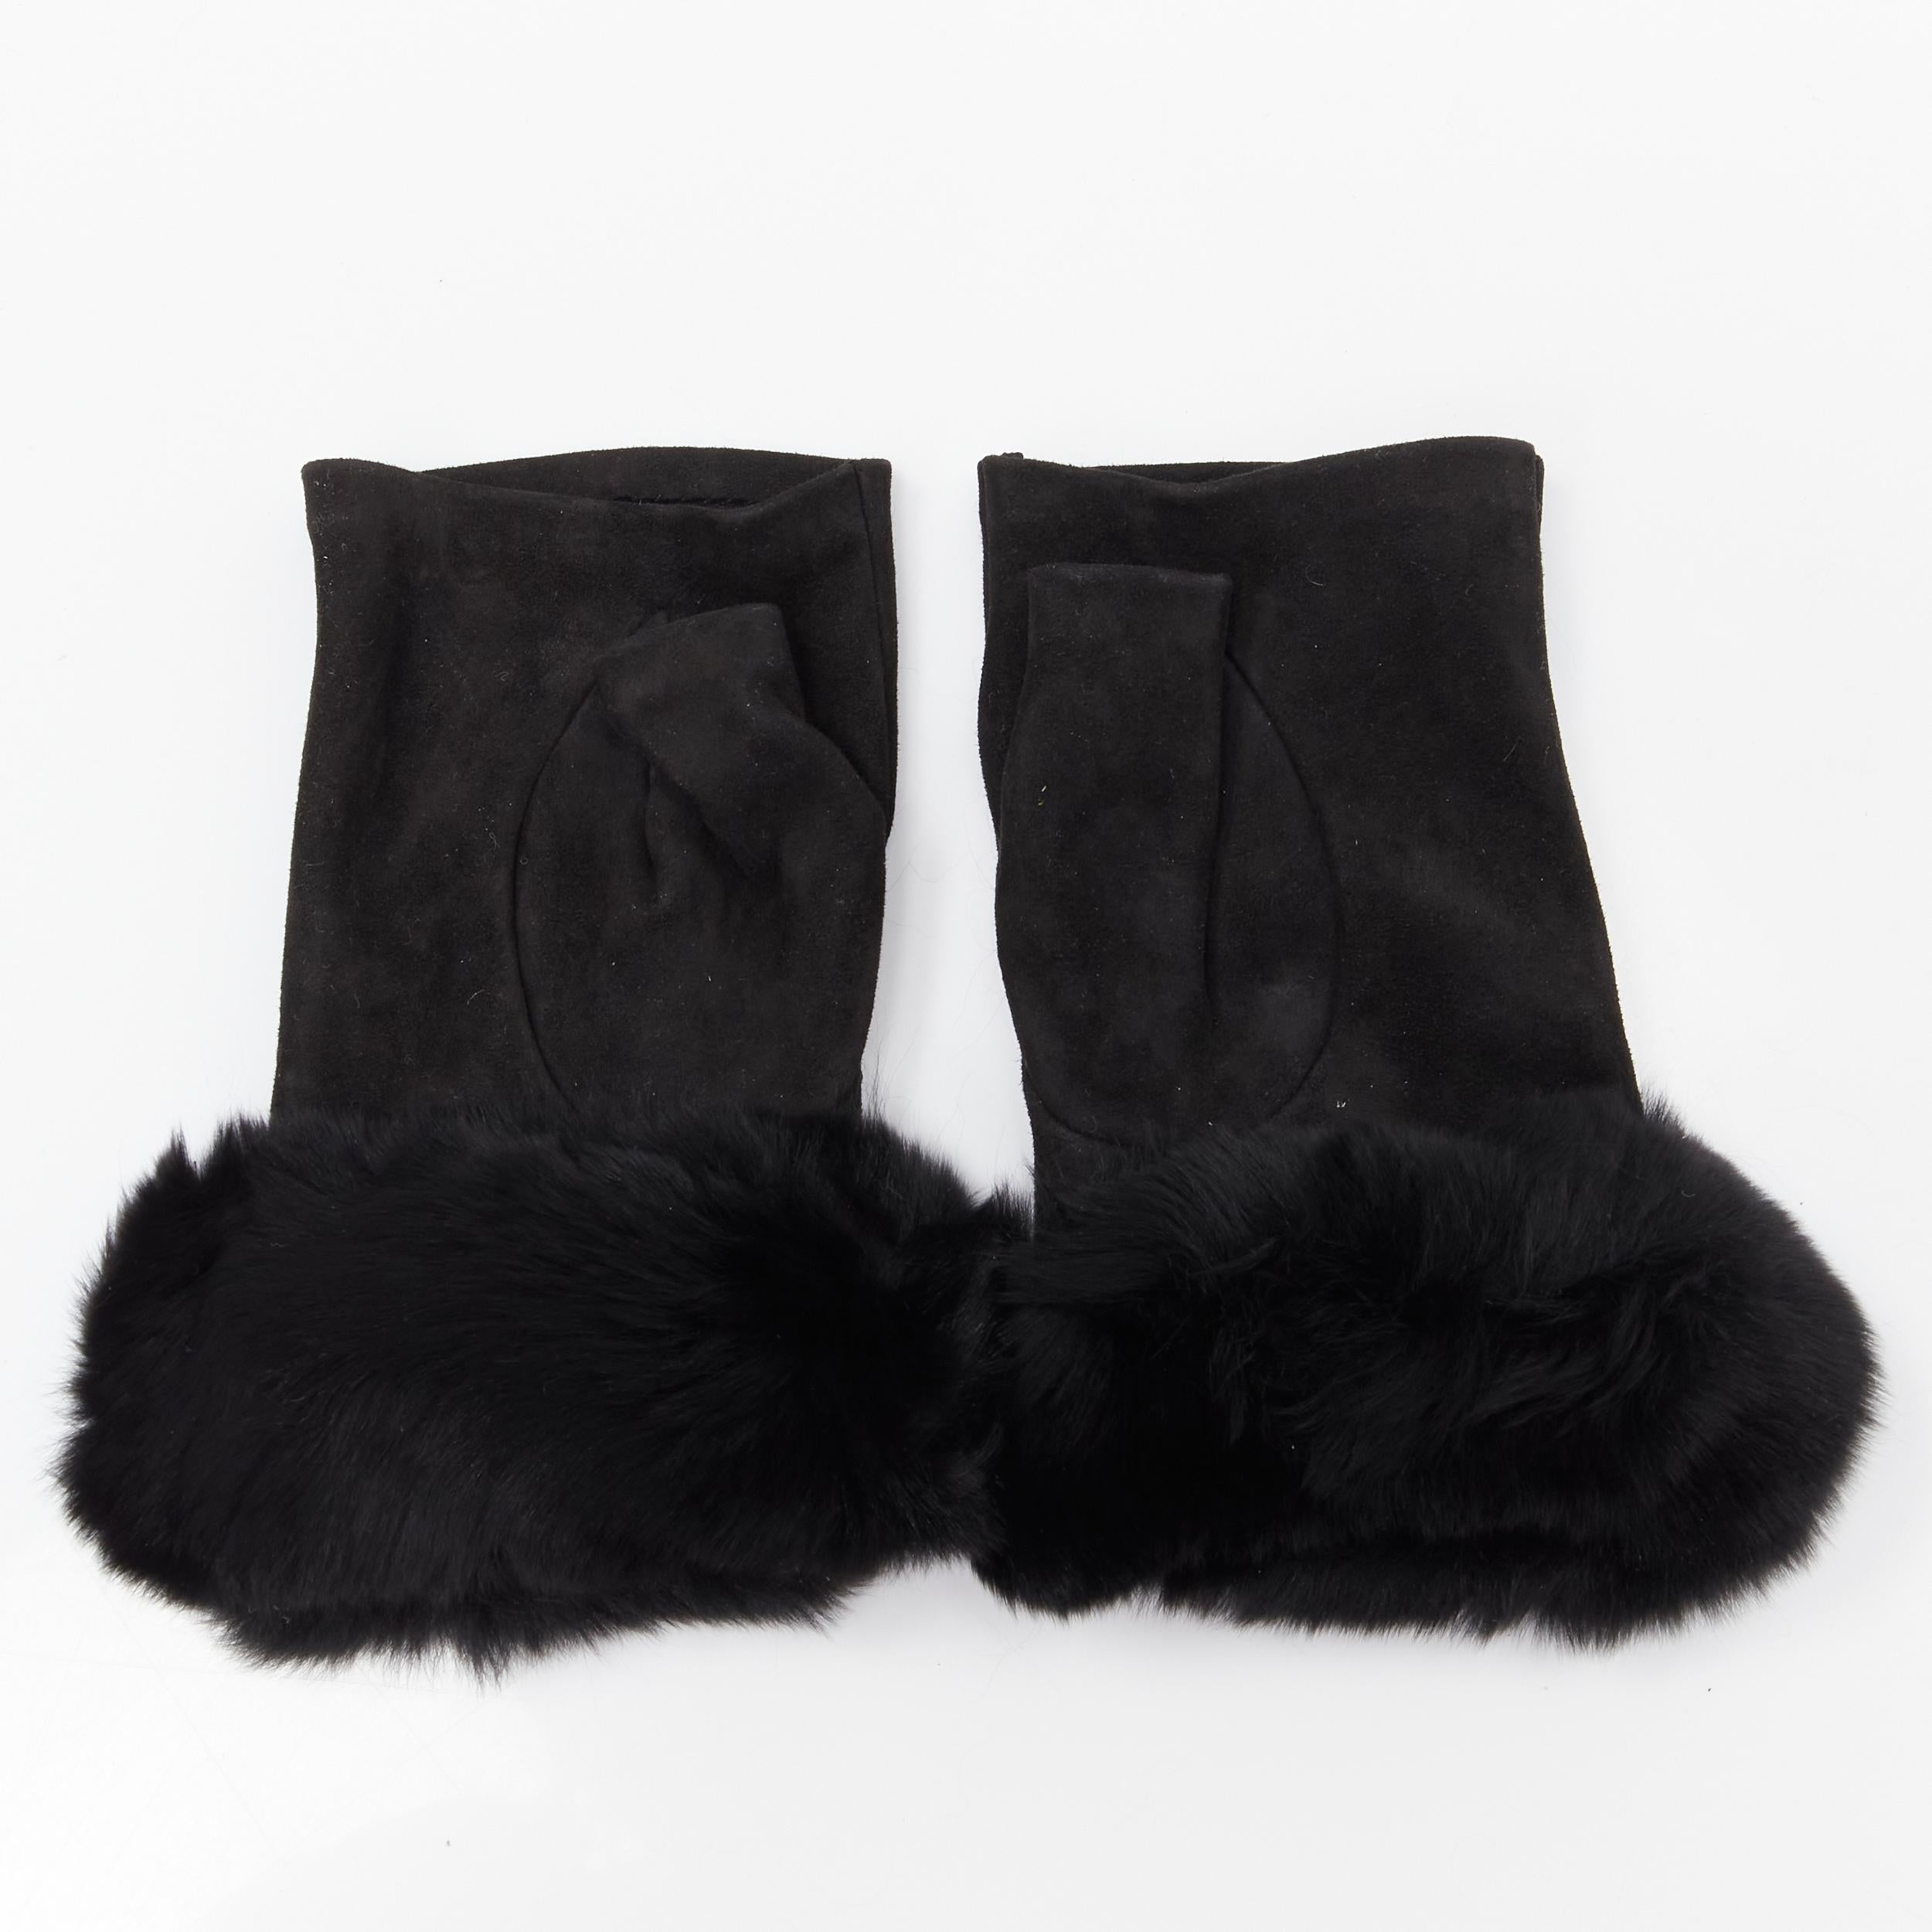 CAUSSE Gantier black soft ruched suede leather chinchilla fur trimmed fingerless glove 6.5 
Reference: MELK/A00174 
Brand: Causse 
Material: Suede 
Color: Black 
Pattern: Solid 
Extra Detail: Gold-tone logo charm. 
Made in: France 

CONDITION: